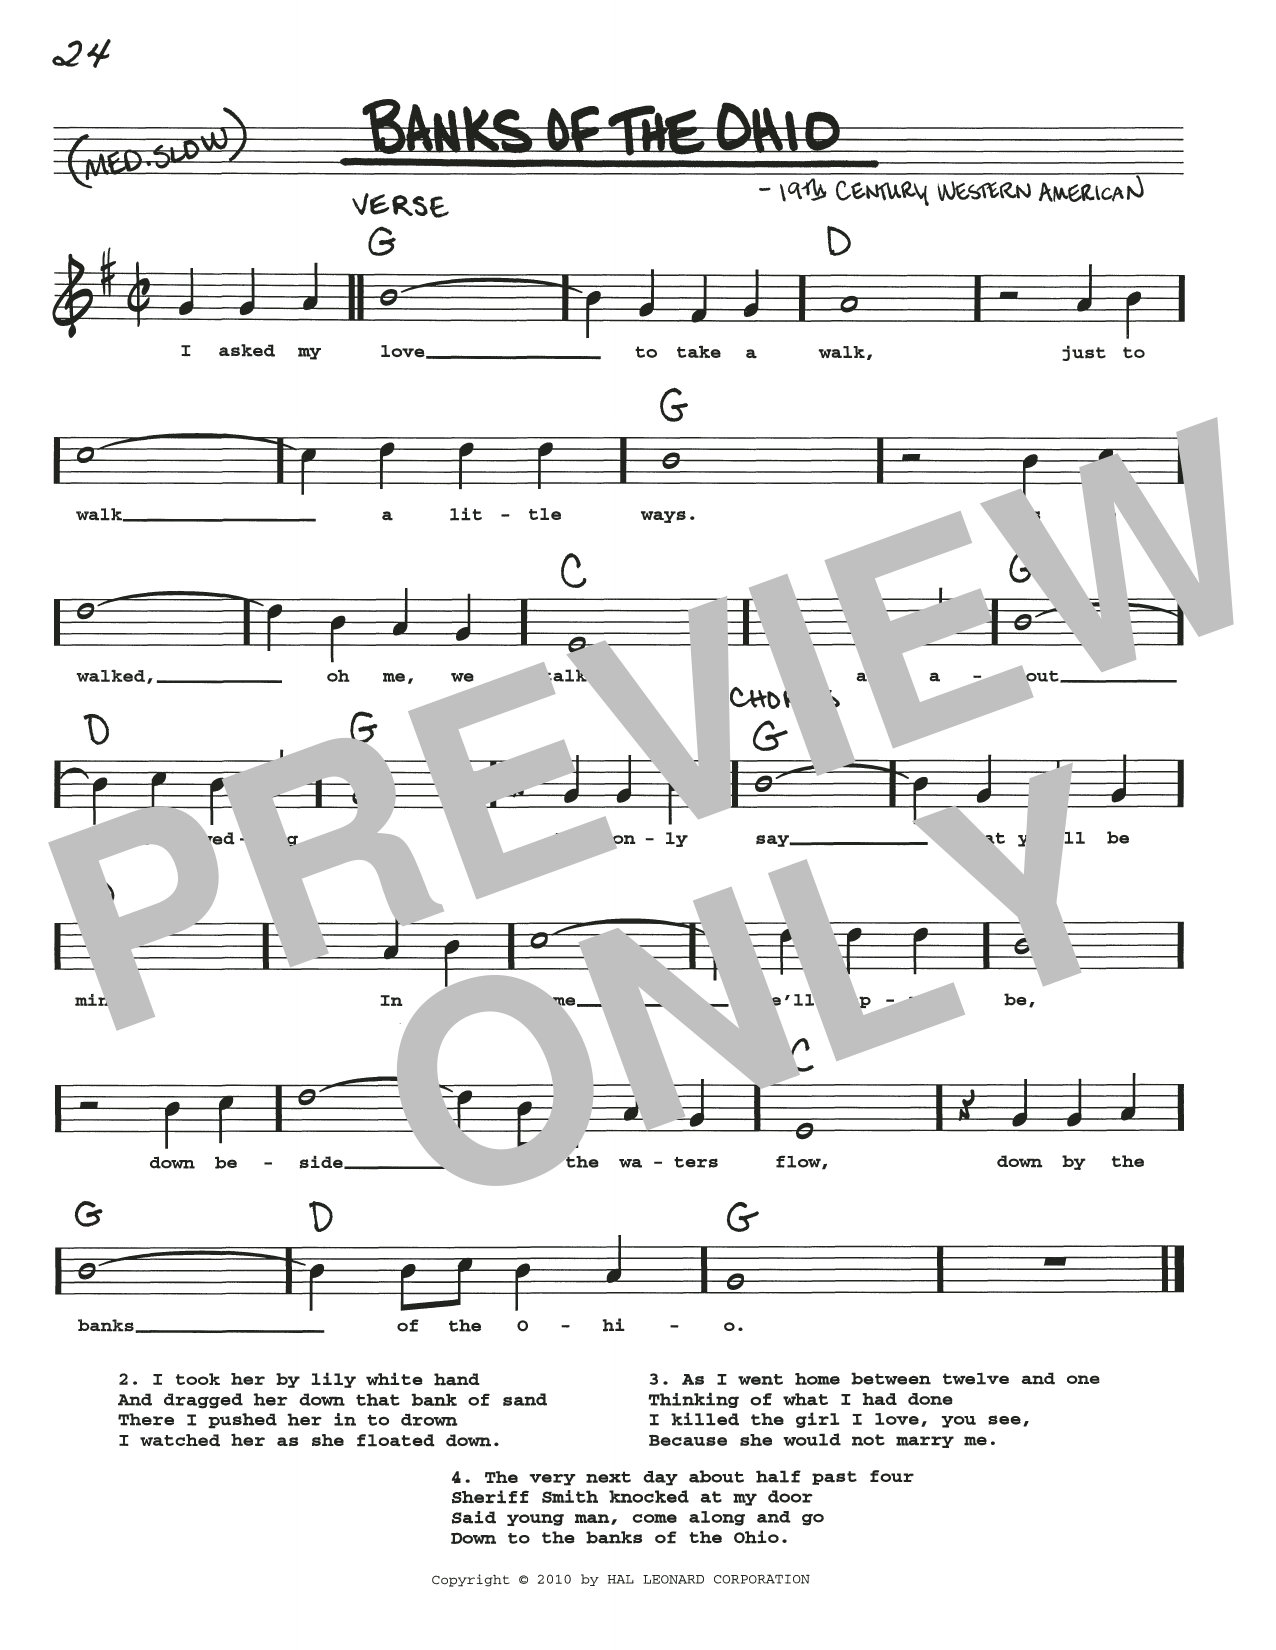 Download 19th Century Western American Banks Of The Ohio Sheet Music